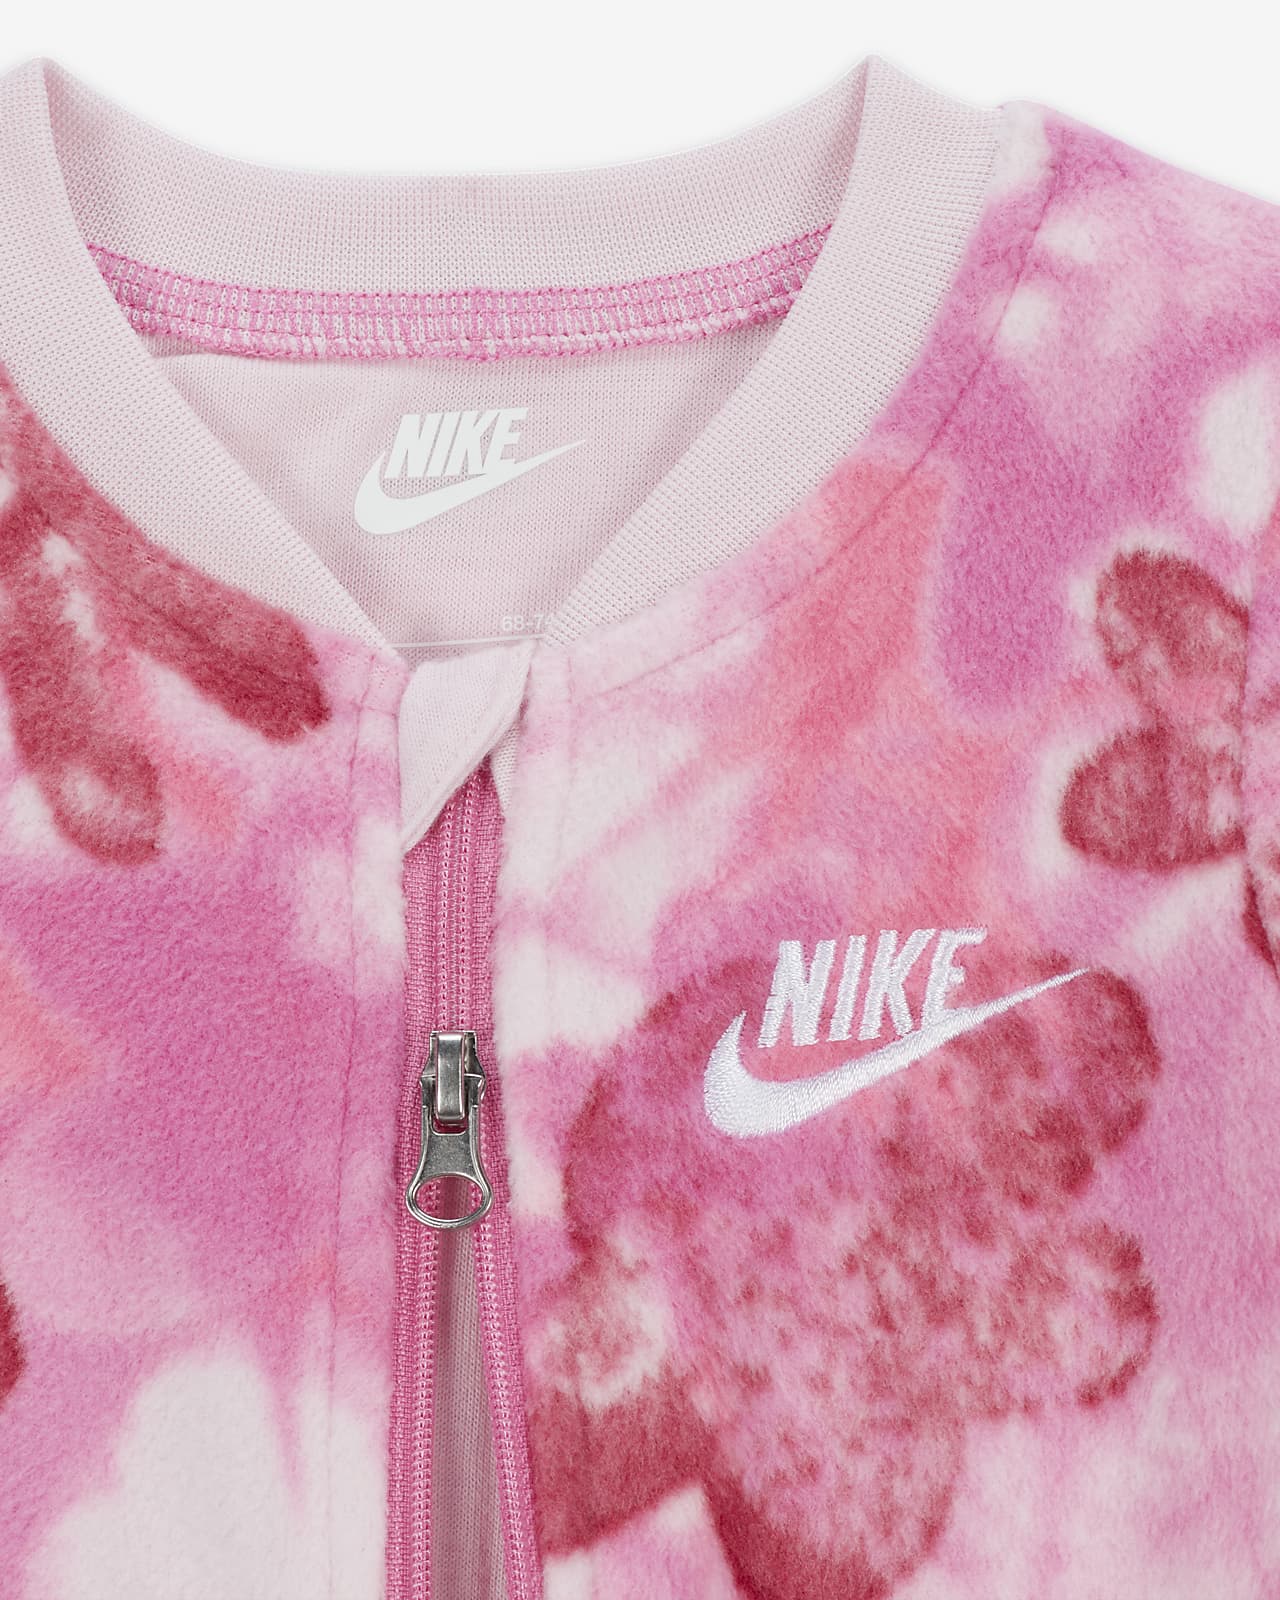 Nike Sci-Dye Club Coverall Baby Coverall.